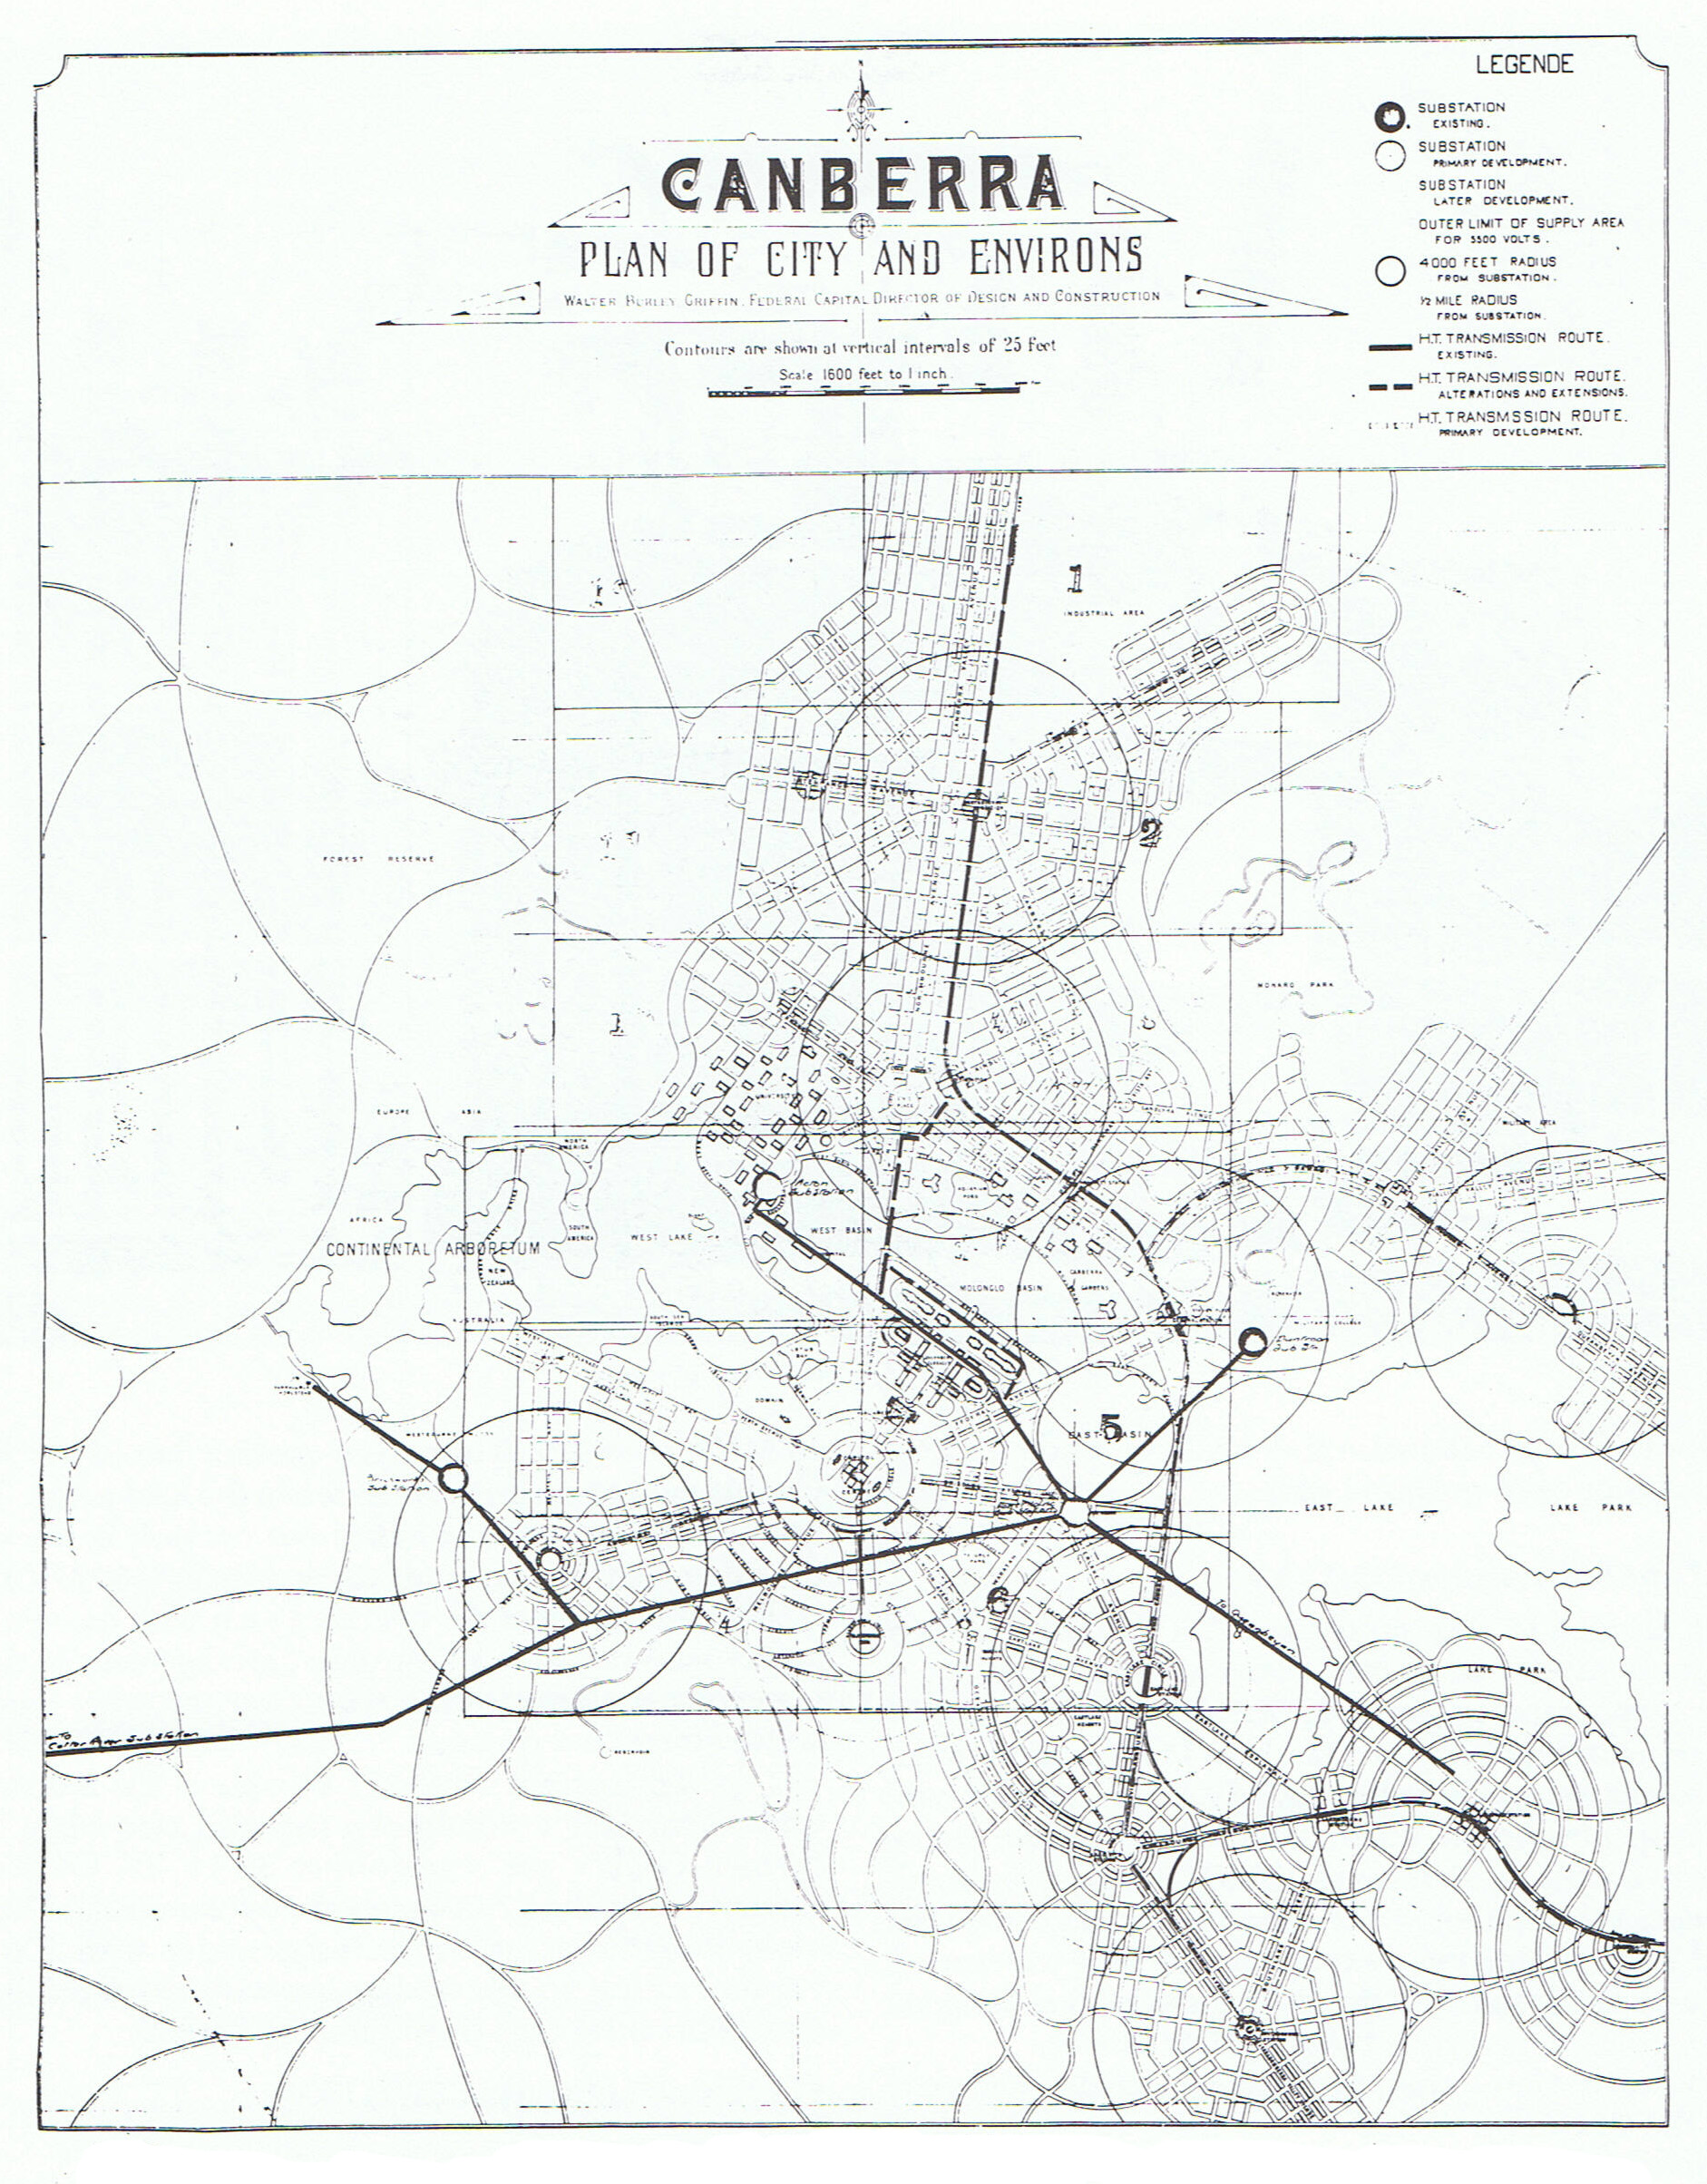 Mains plan of the city in 1918